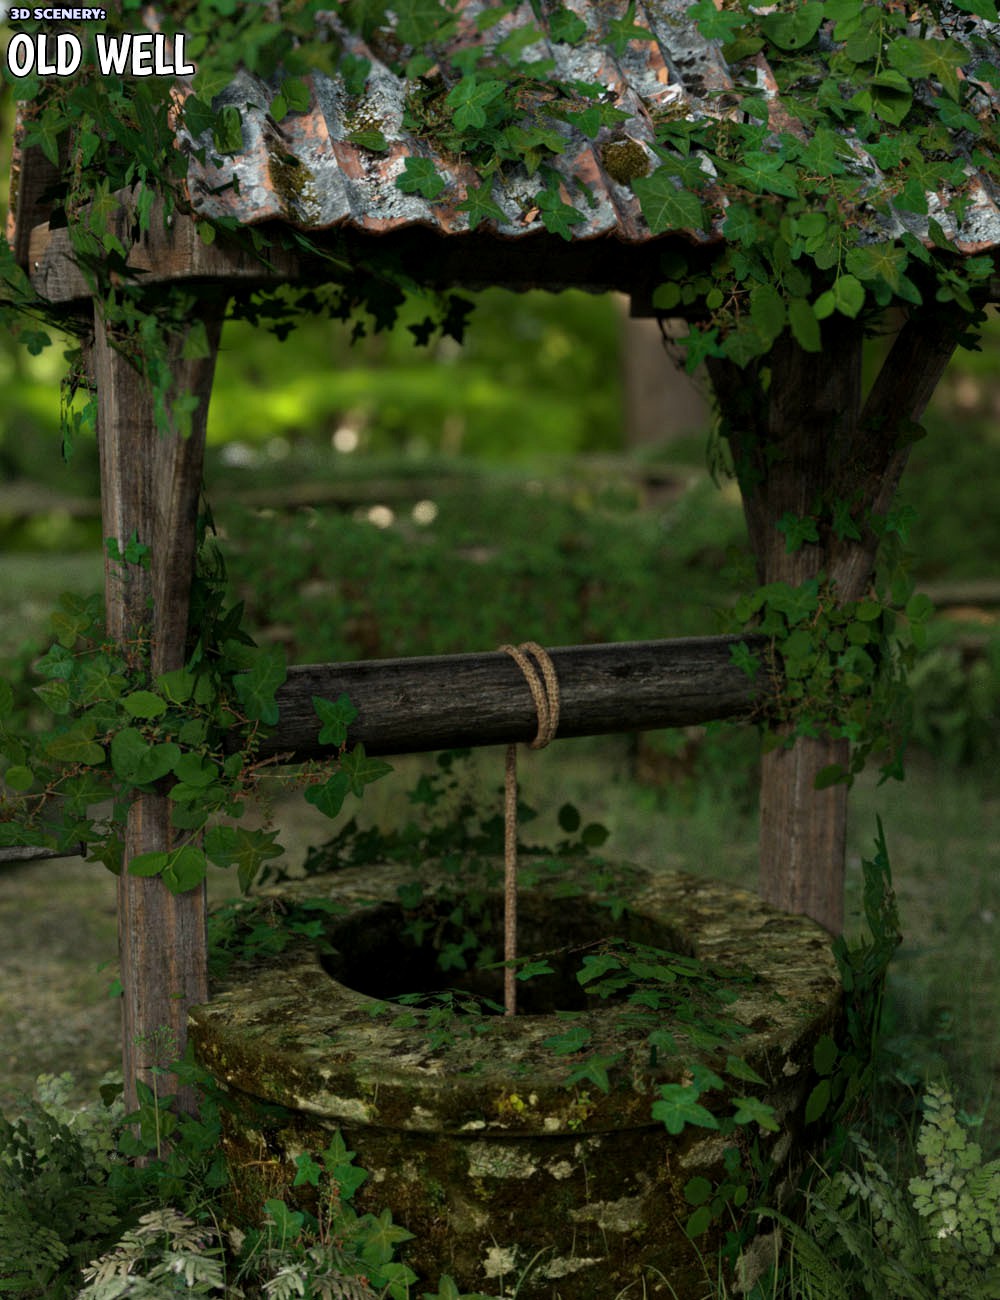 3D Scenery: Old Well